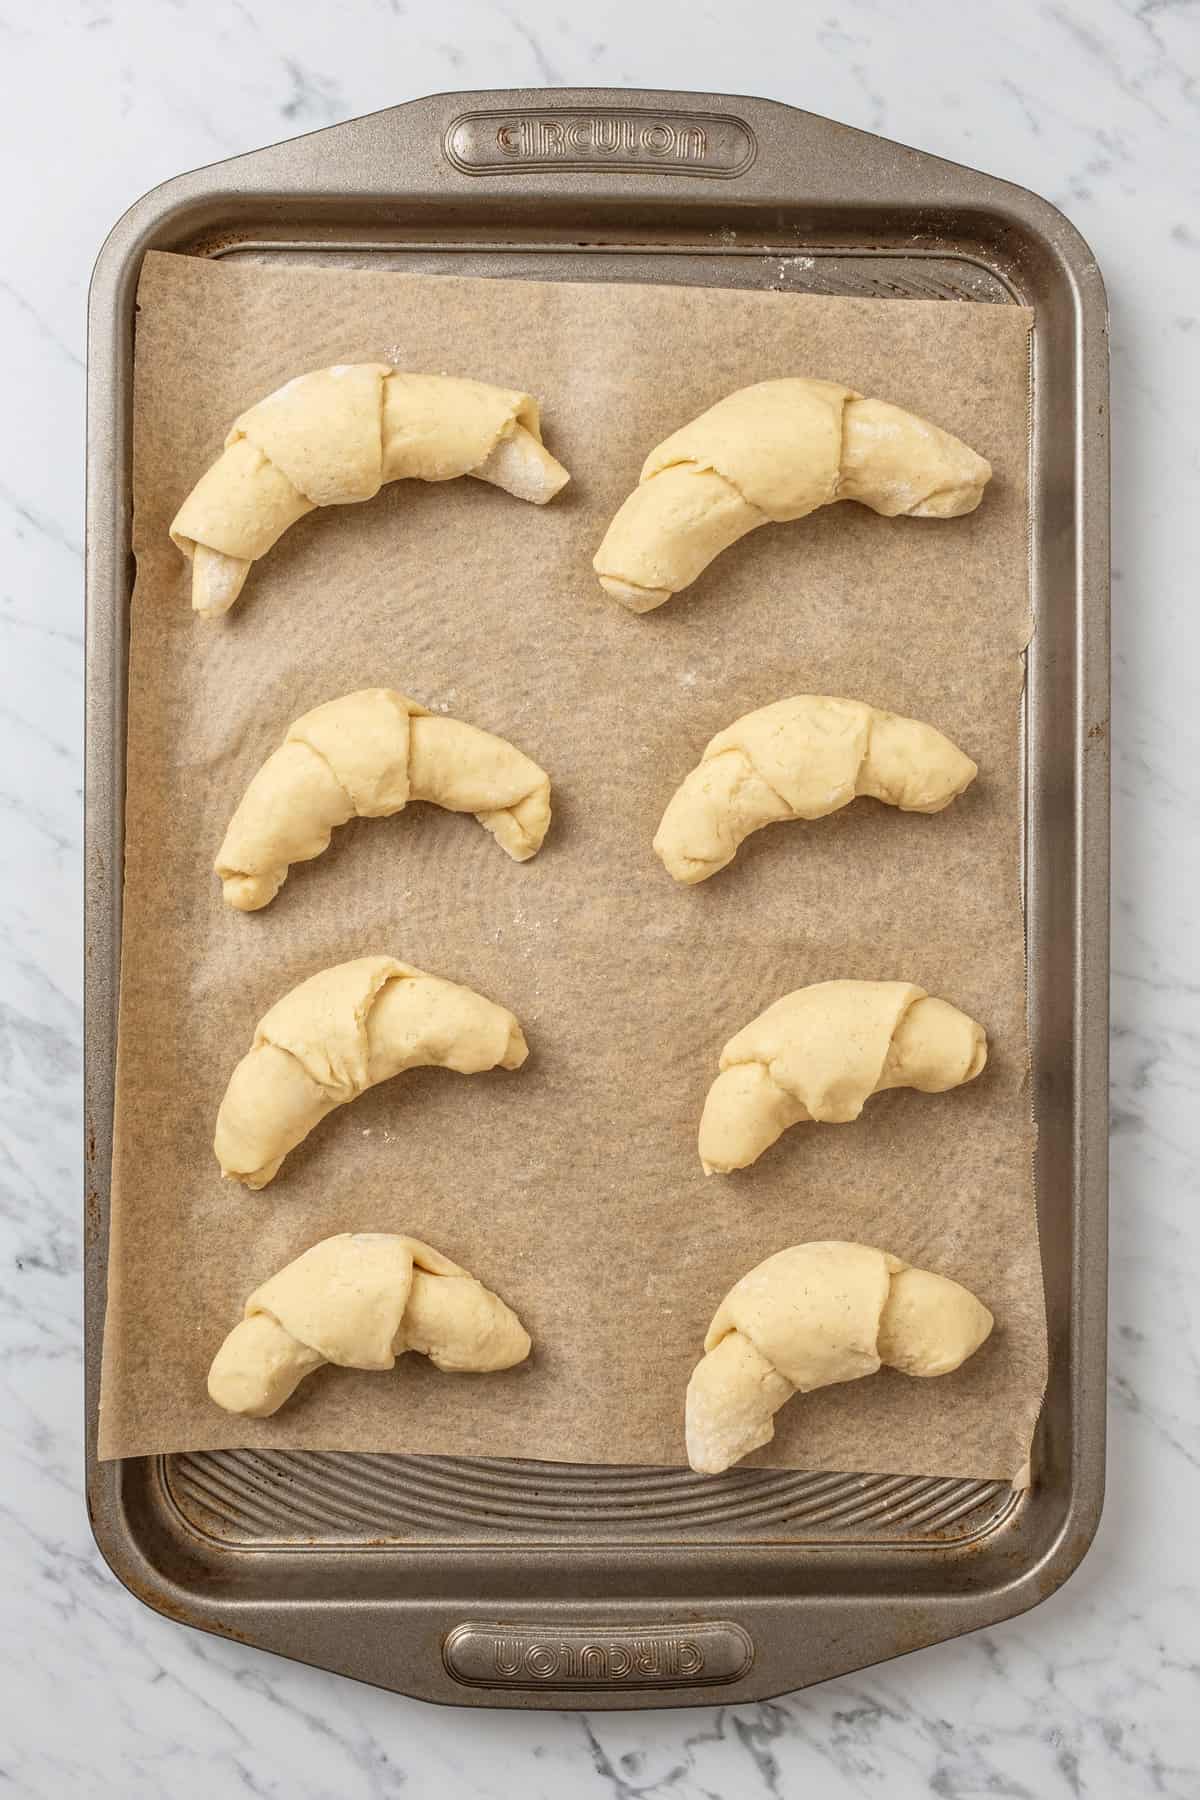 Unbaked gluten free crescent rolls lined up on a parchment-lined baking sheet.